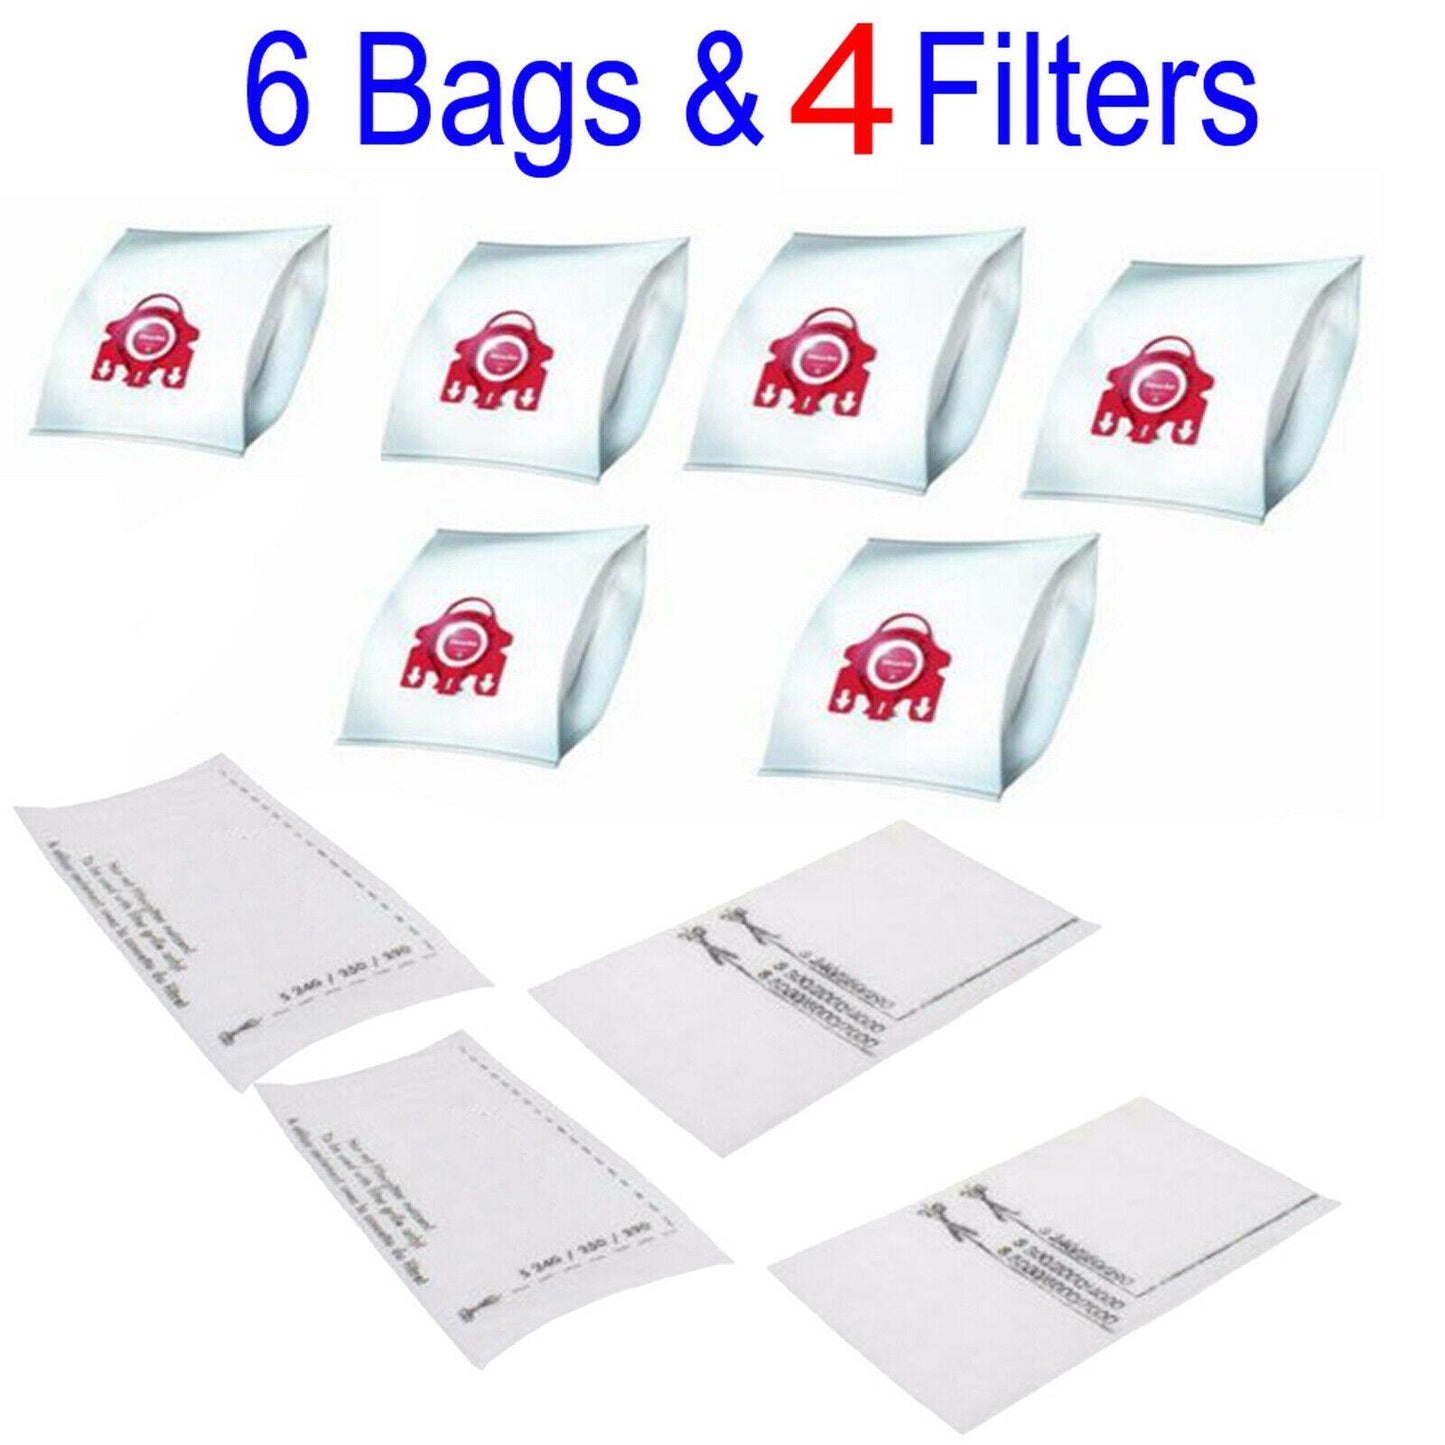 6 Synthetic Dust Bags & 4 Filters For Miele FJM Hyclean COMPACT C1 C2 S4 Model Sparesbarn